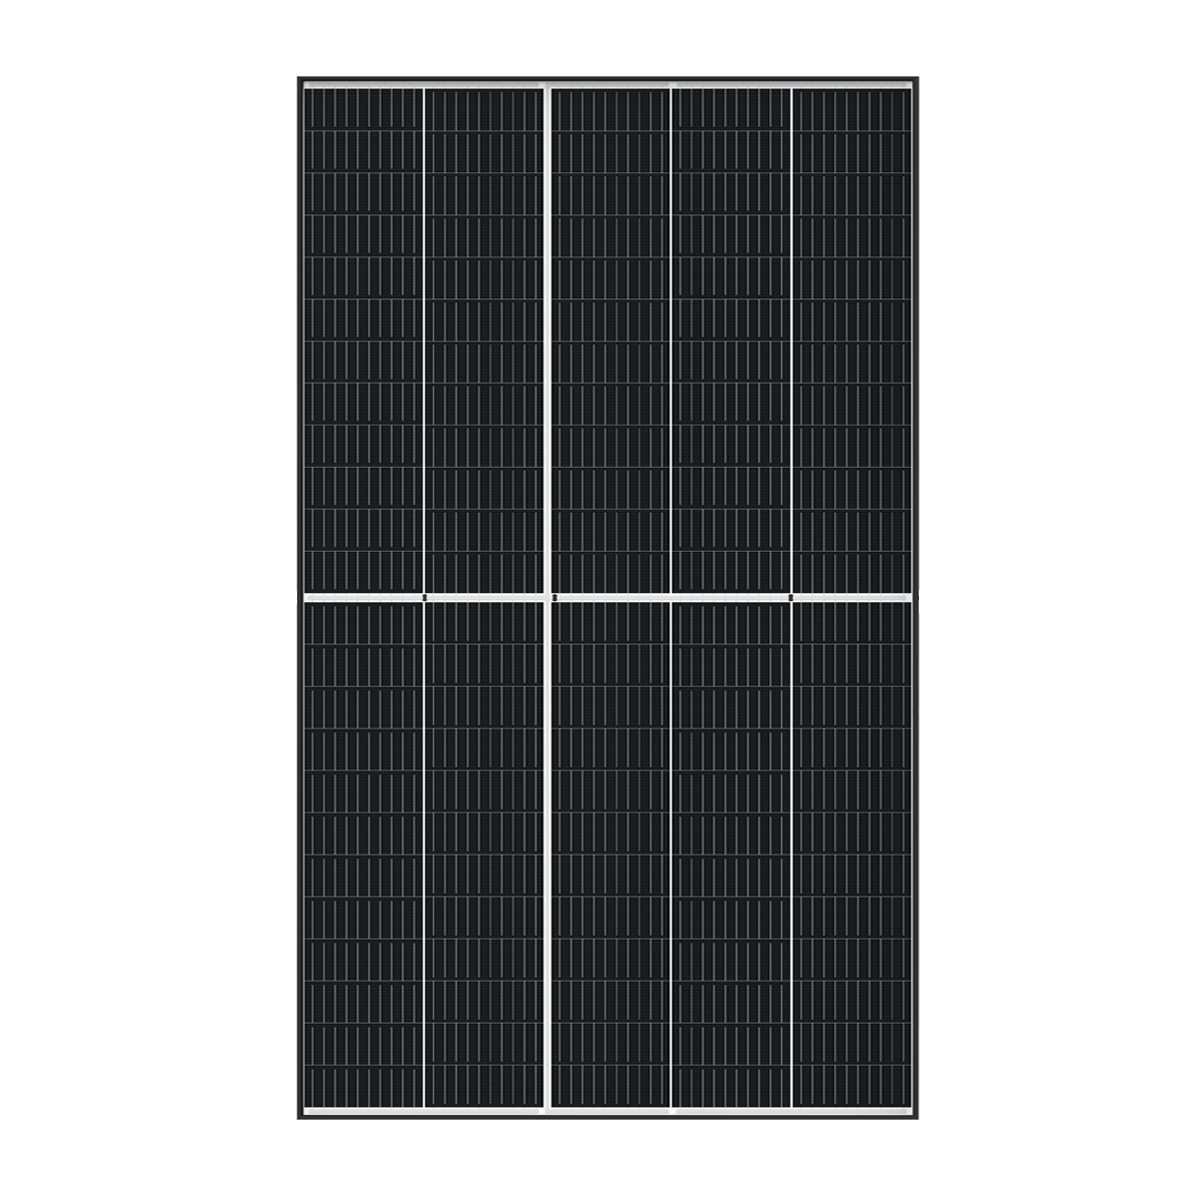 Photovoltaic (PV) System